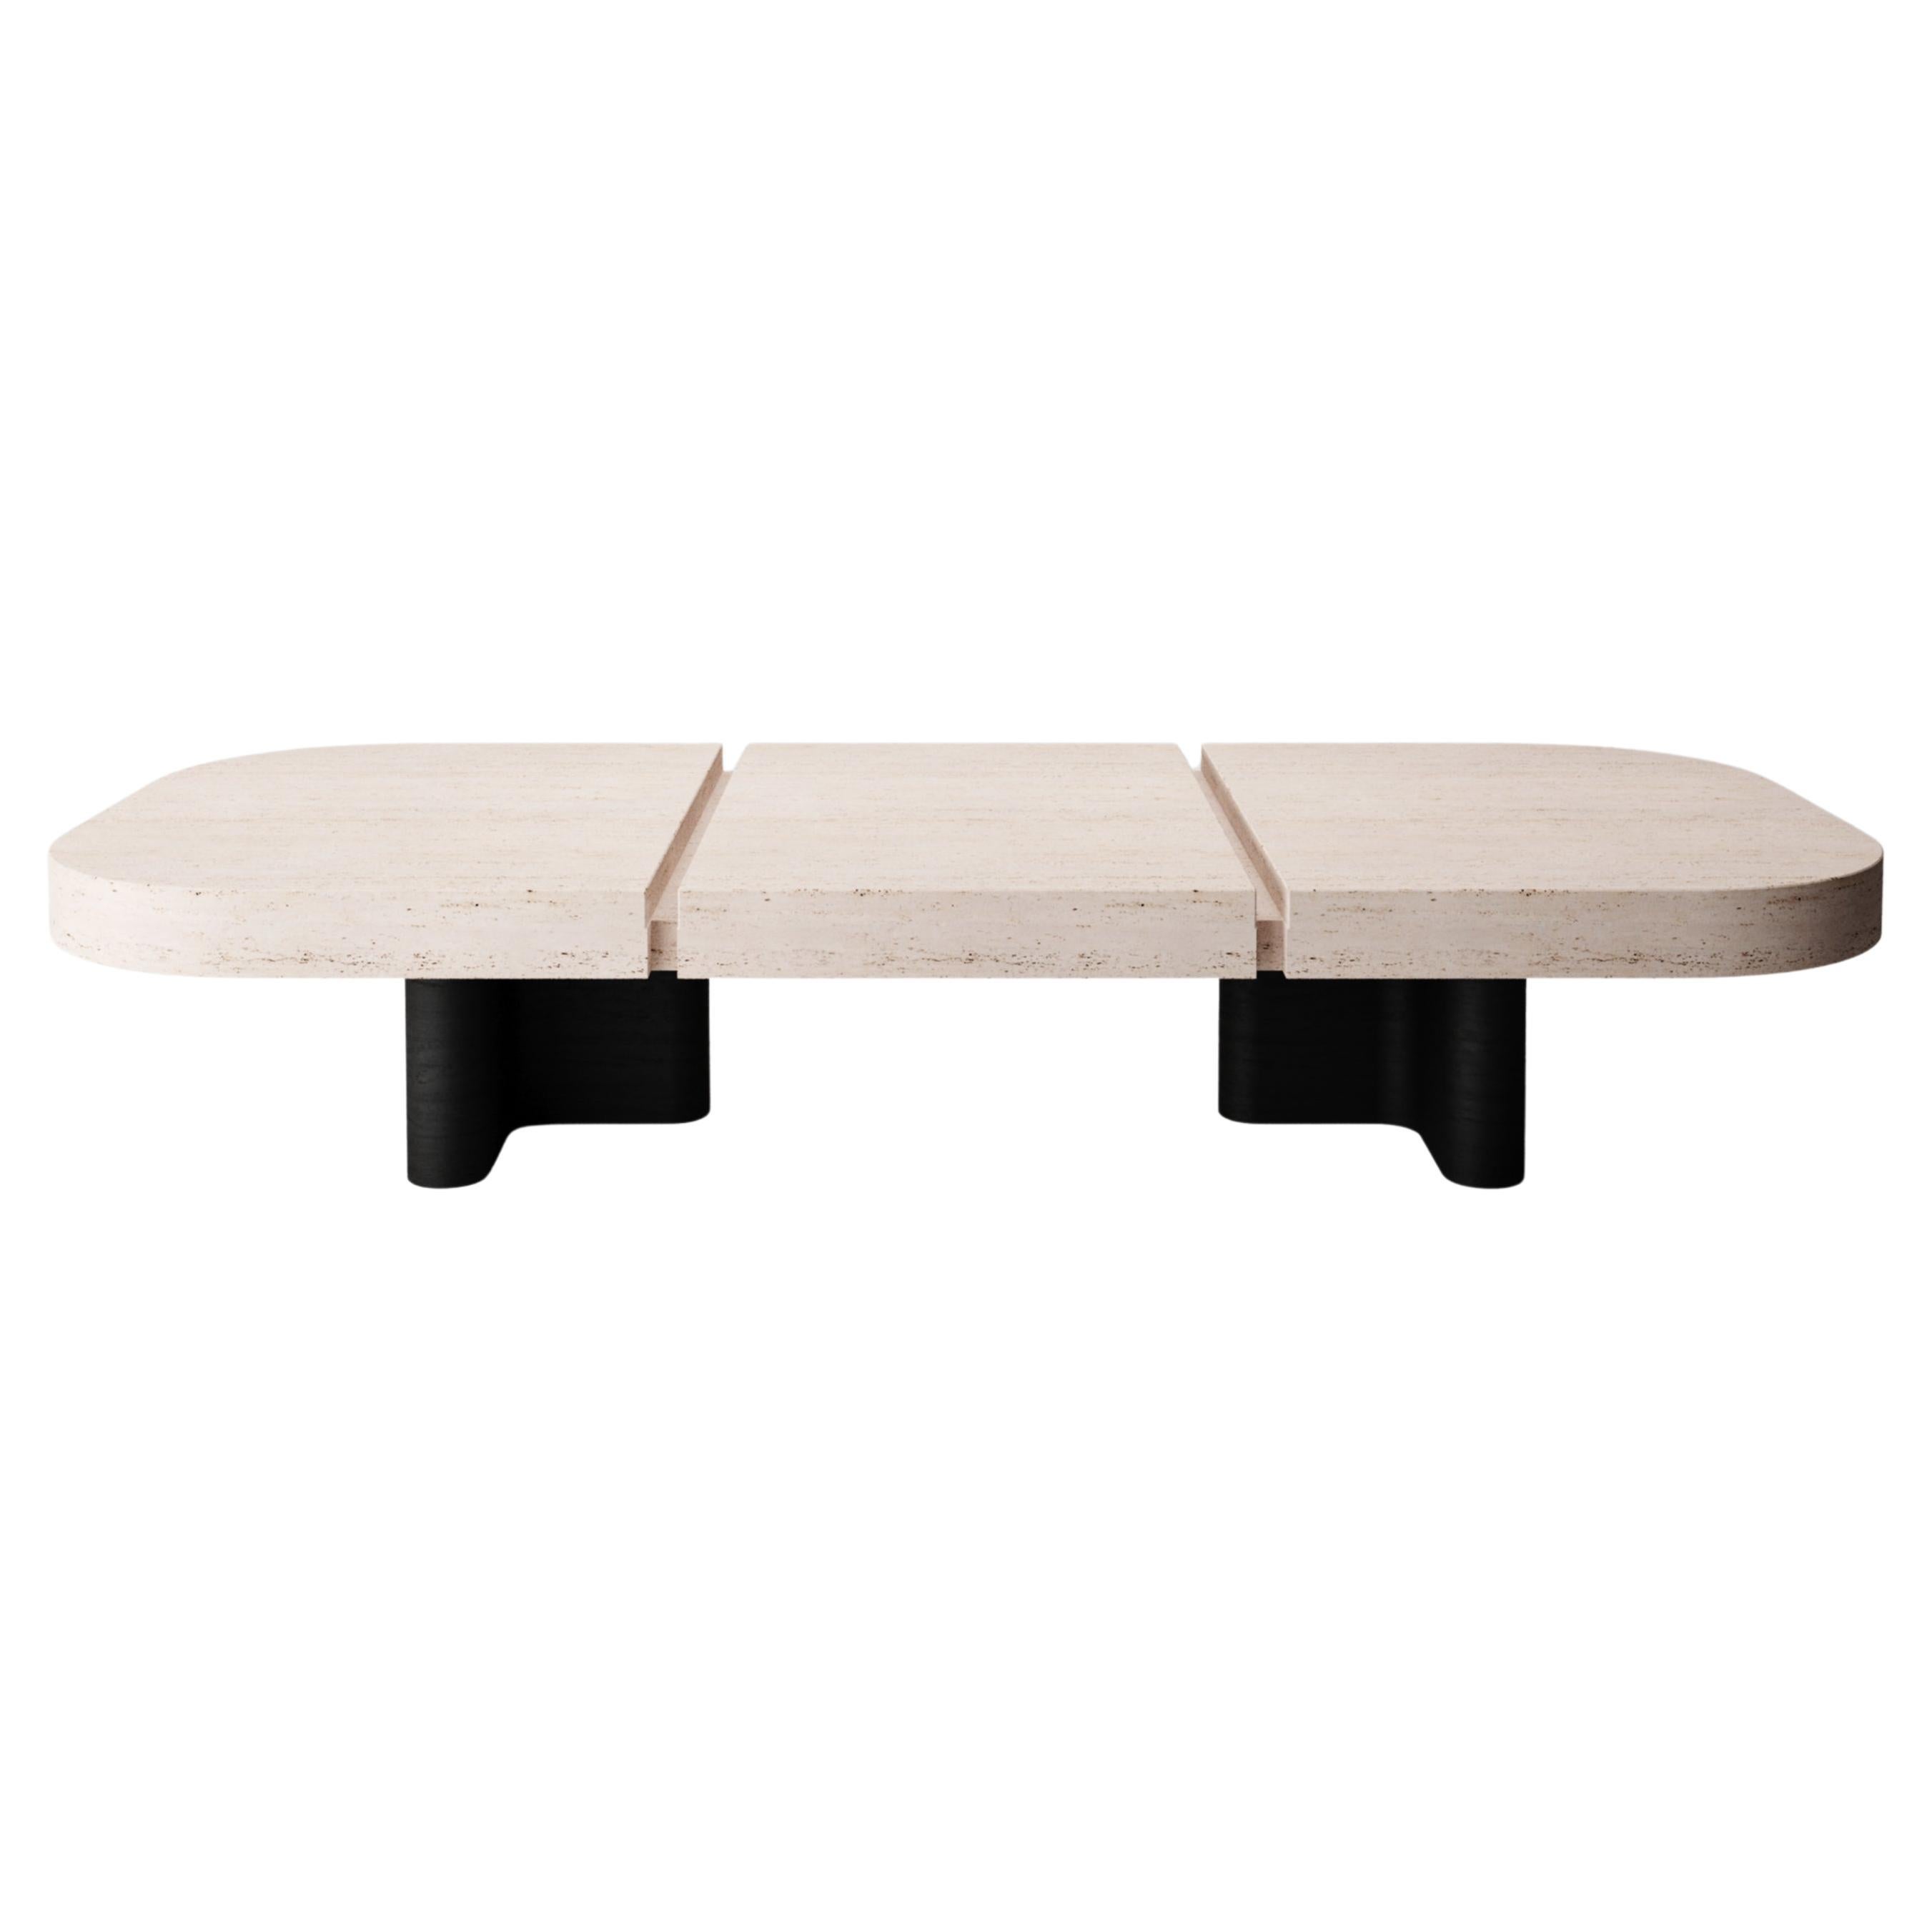 Collector -Designed by Studio Rig Meco Center Table Black Oak and Travertino